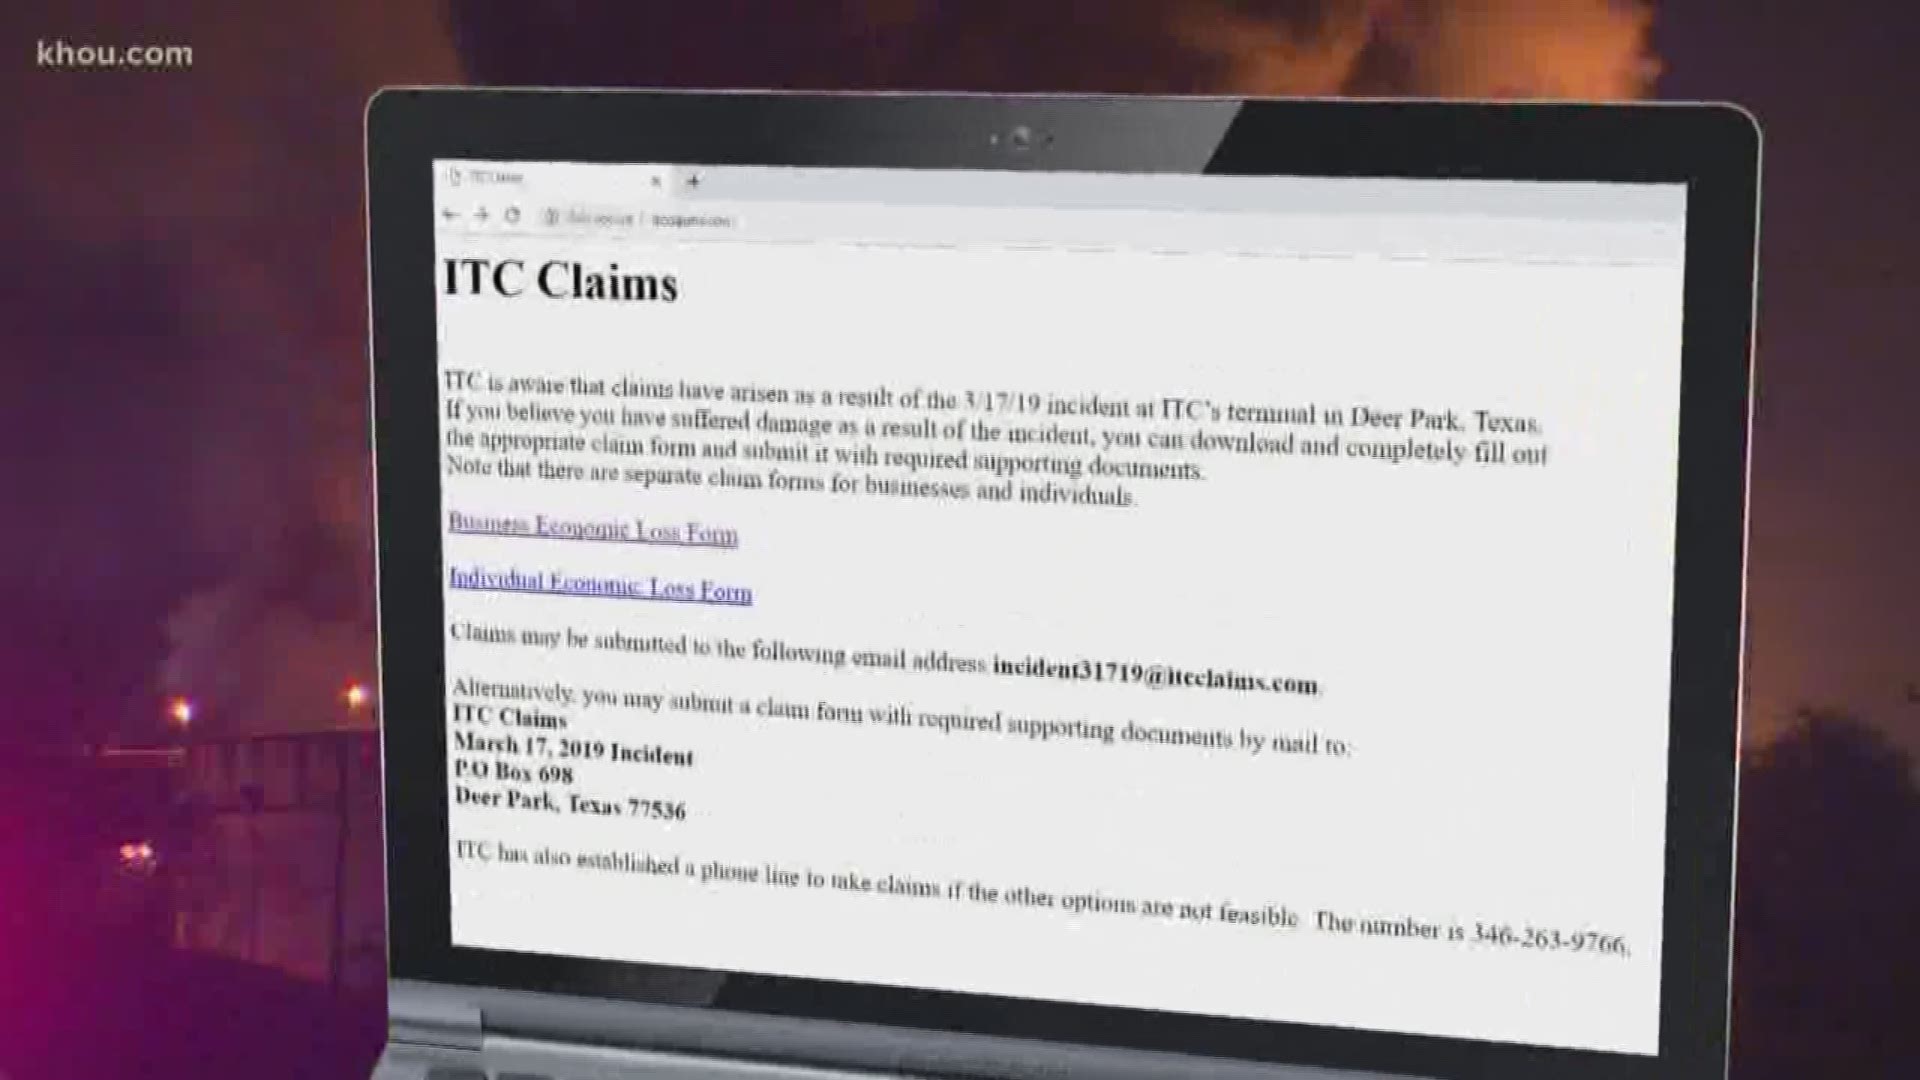 KHOU 11 Investigates has learned ITC was using an unsecure website to receive claims from people impacted by the fire.